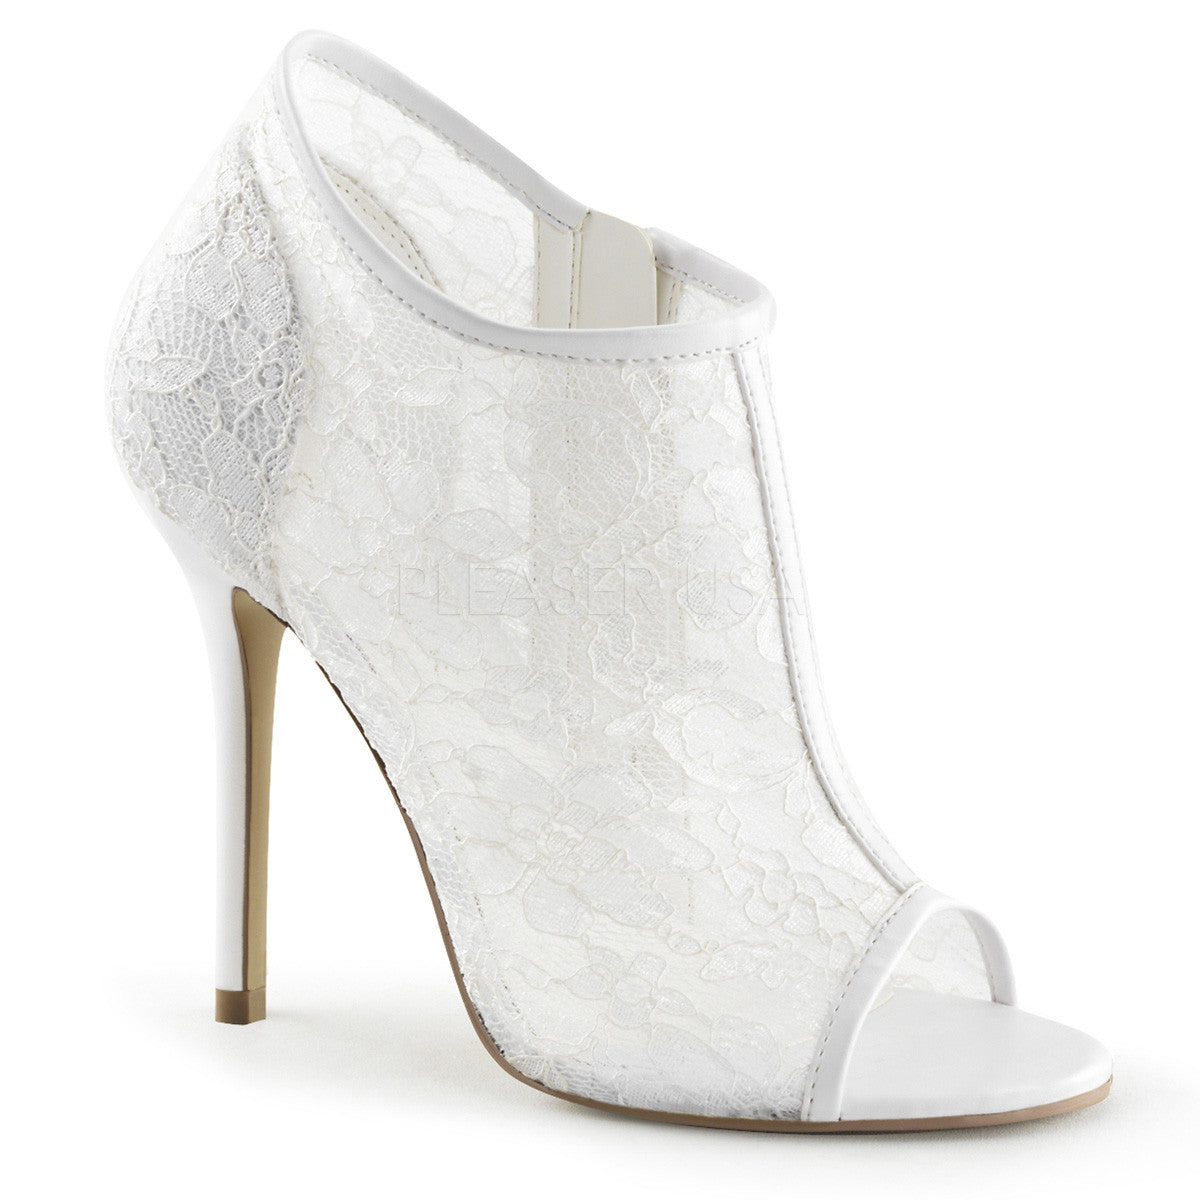 FABULICIOUS AMUSE-56 Ivory Lace-Mesh Ankle Boots - Shoecup.com - 1